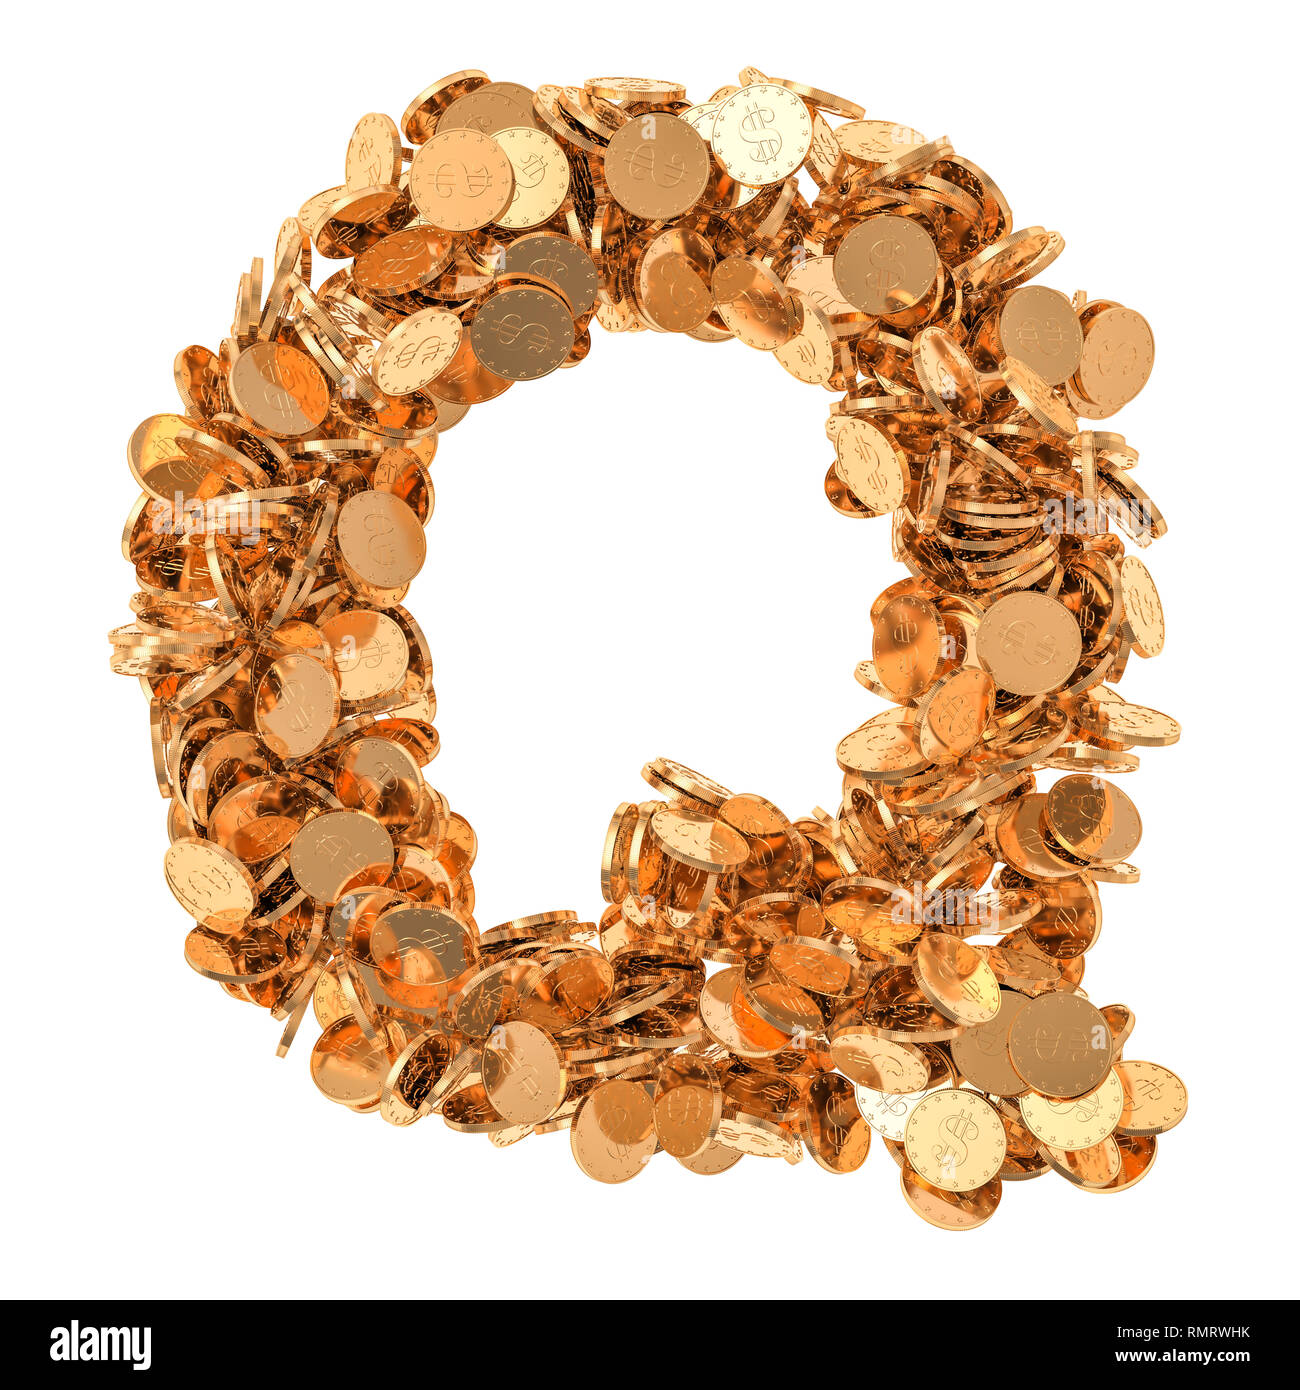 Alphabet letter Q, from golden dollar coins. 3D rendering isolated on white background Stock Photo